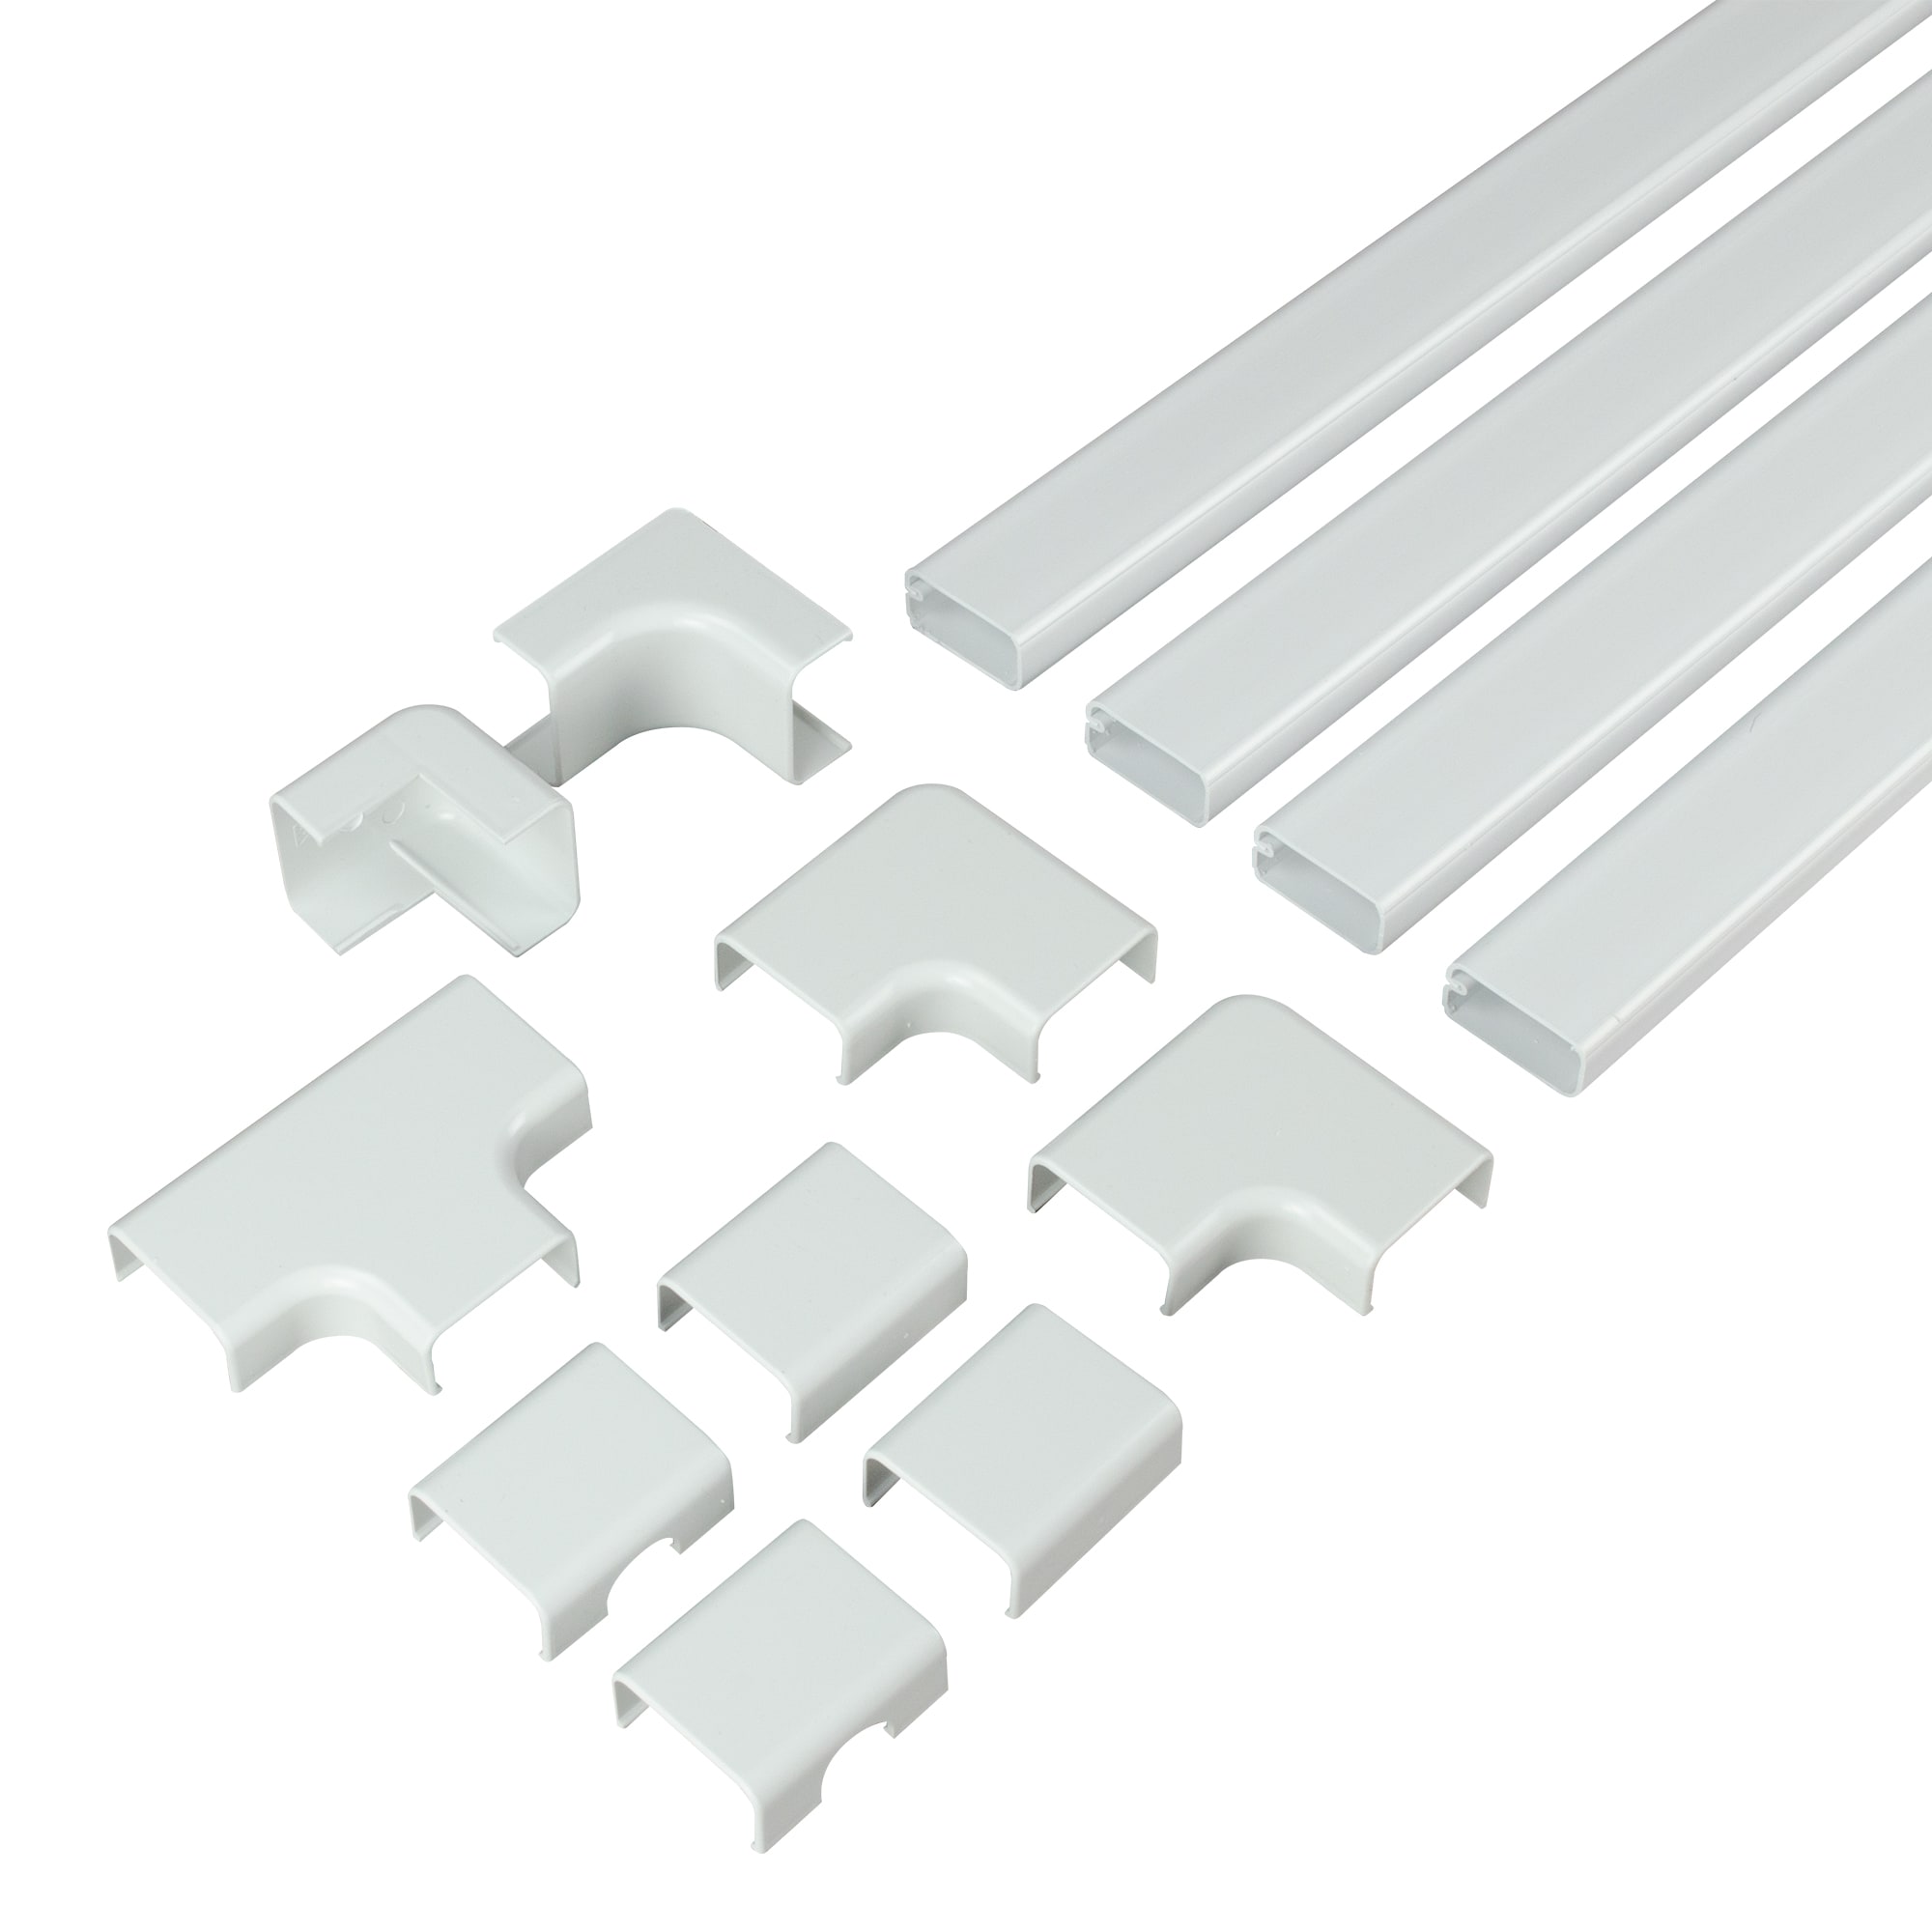 Wiremold CornerMate 5-ft x 2-in PVC White Straight Channel Cord